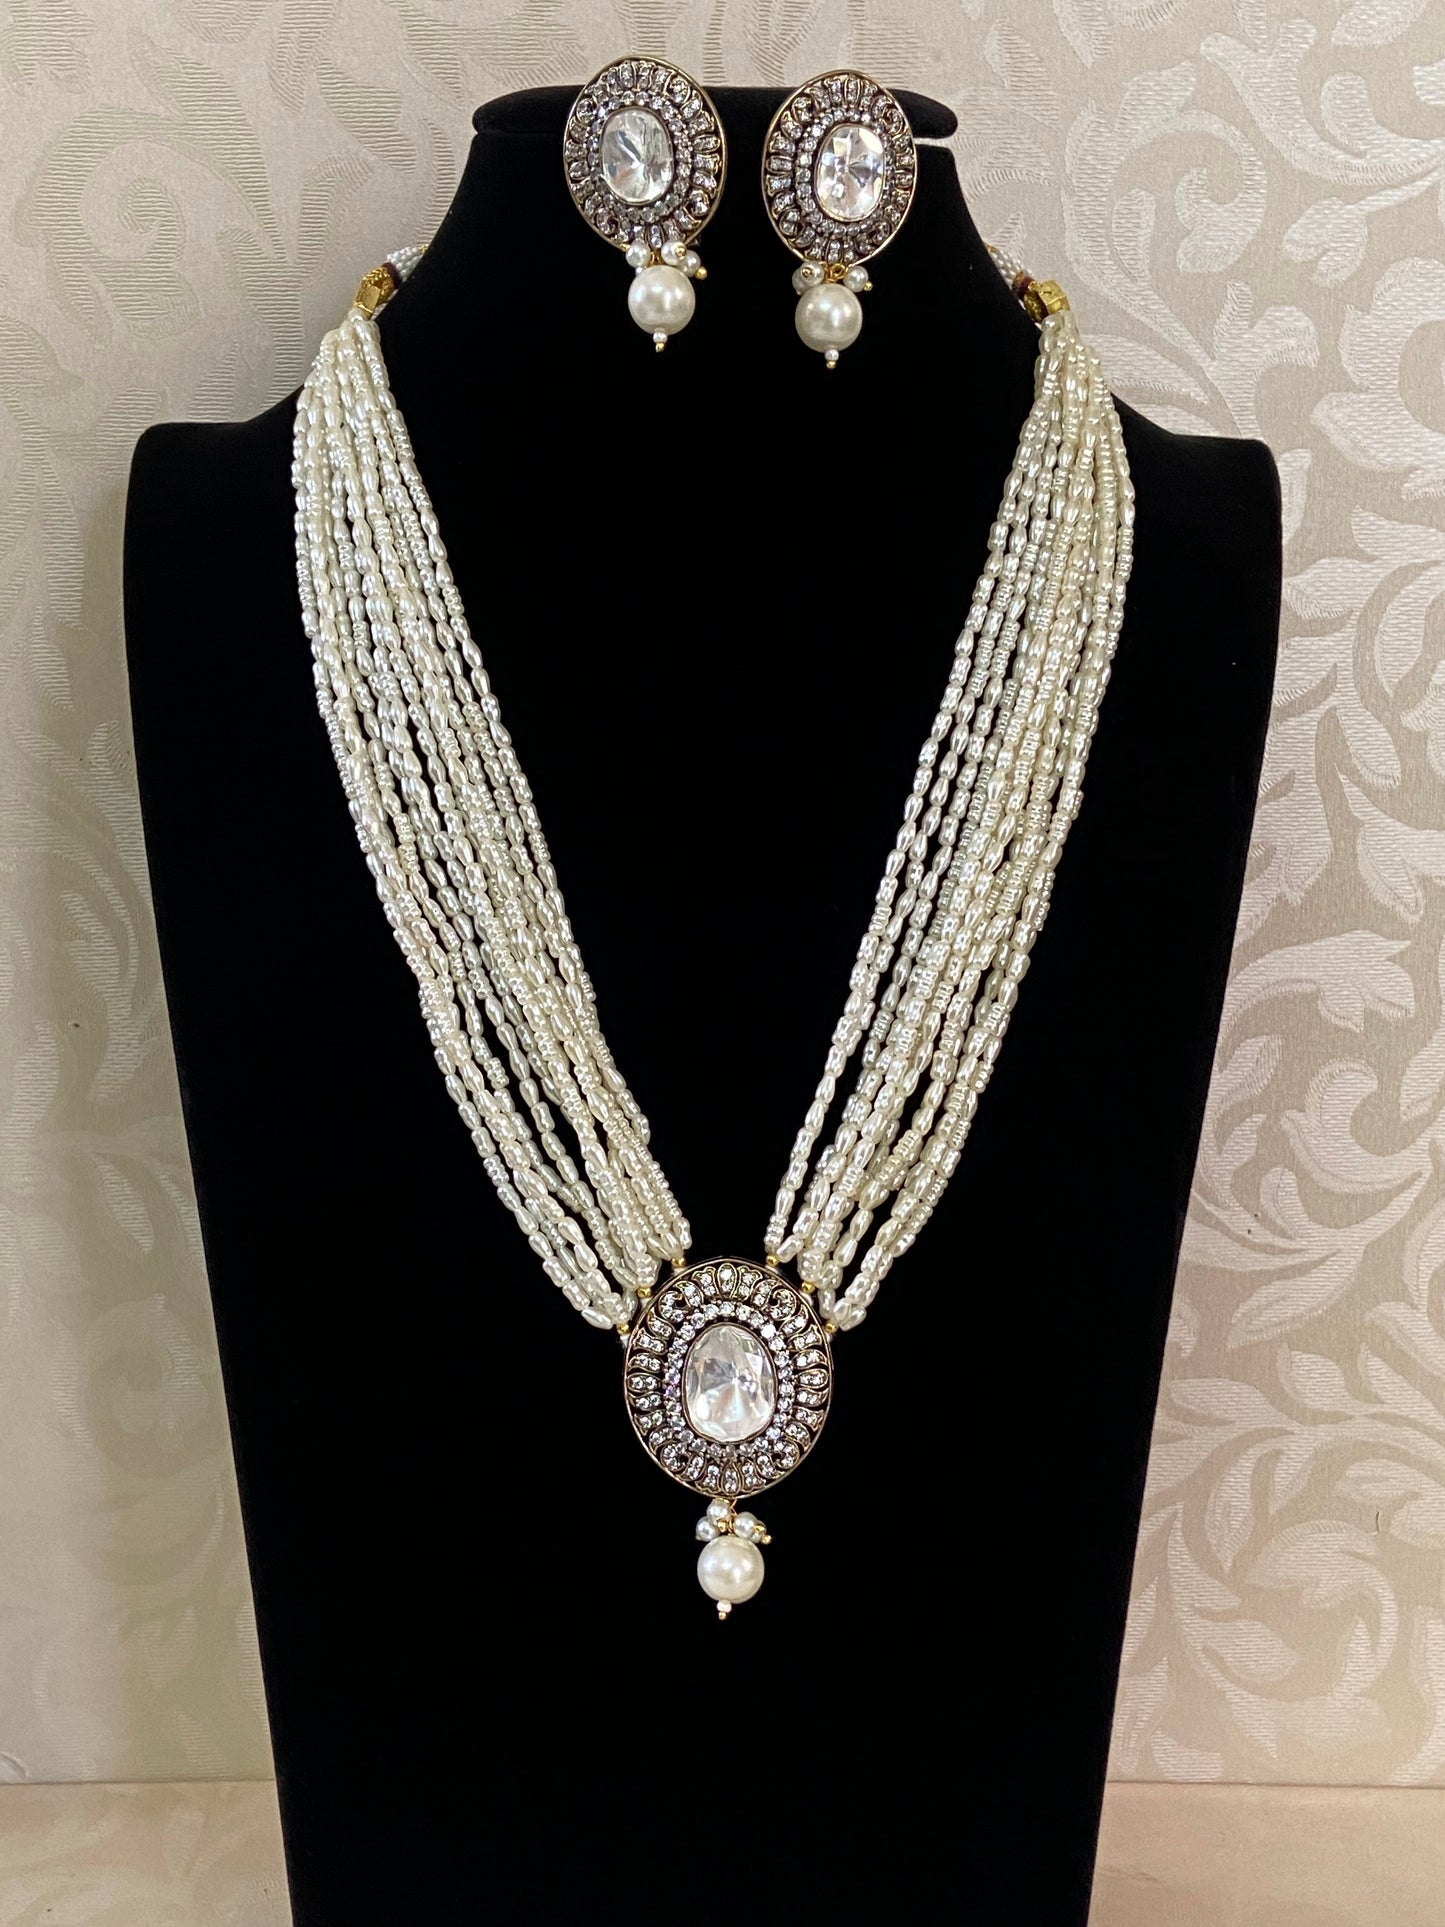 Victorian ad pendant faux pearls necklace | Light weight necklace